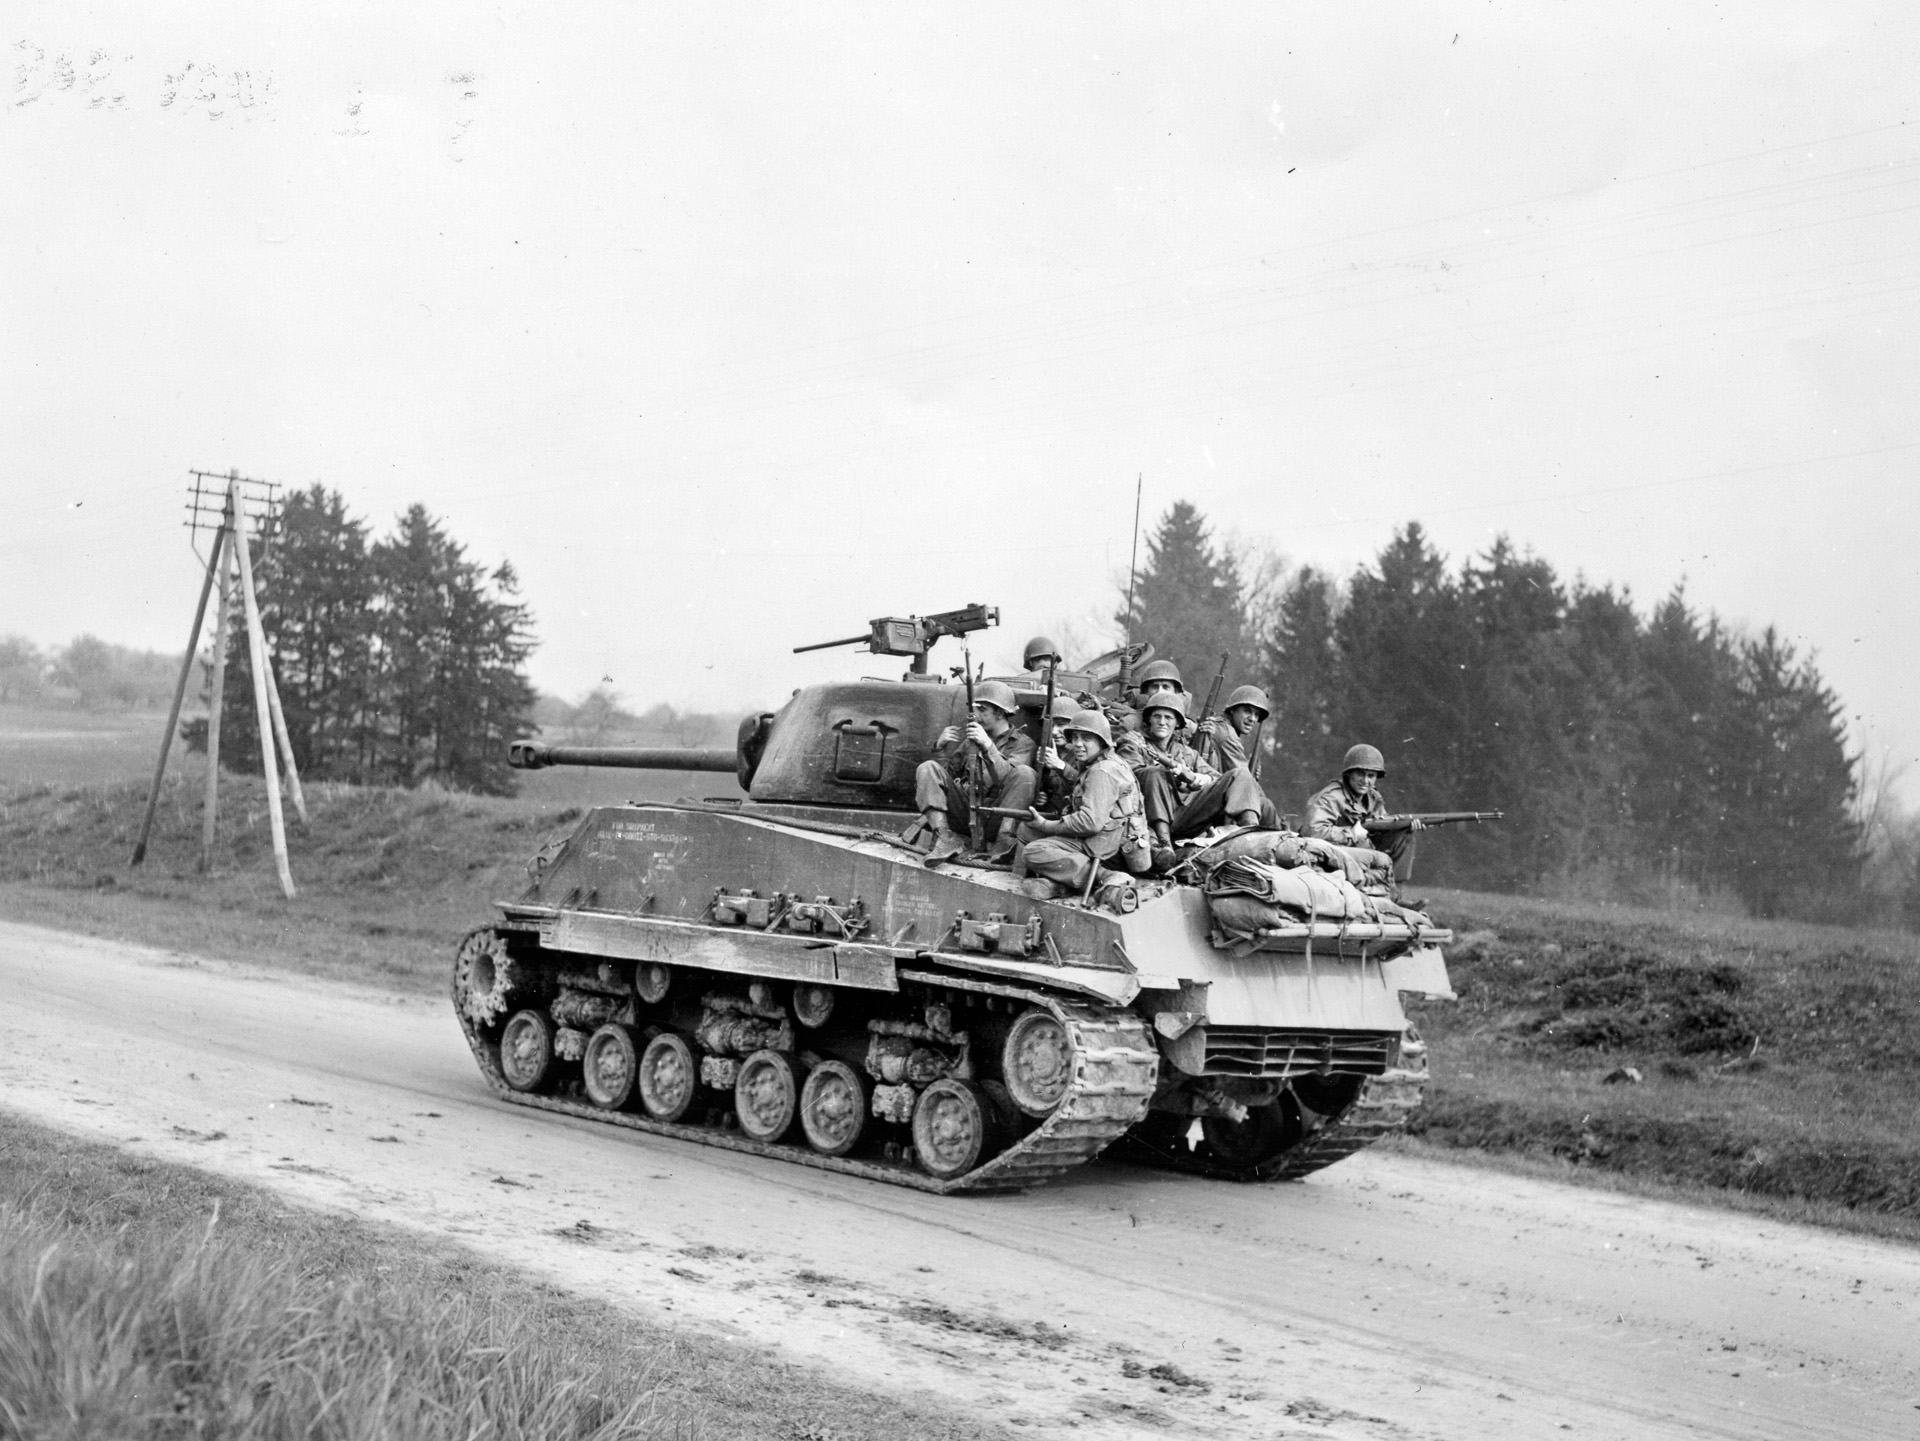 Why walk when you can ride? Infantrymen get a lift to the front atop a 10th Armored Division tank.